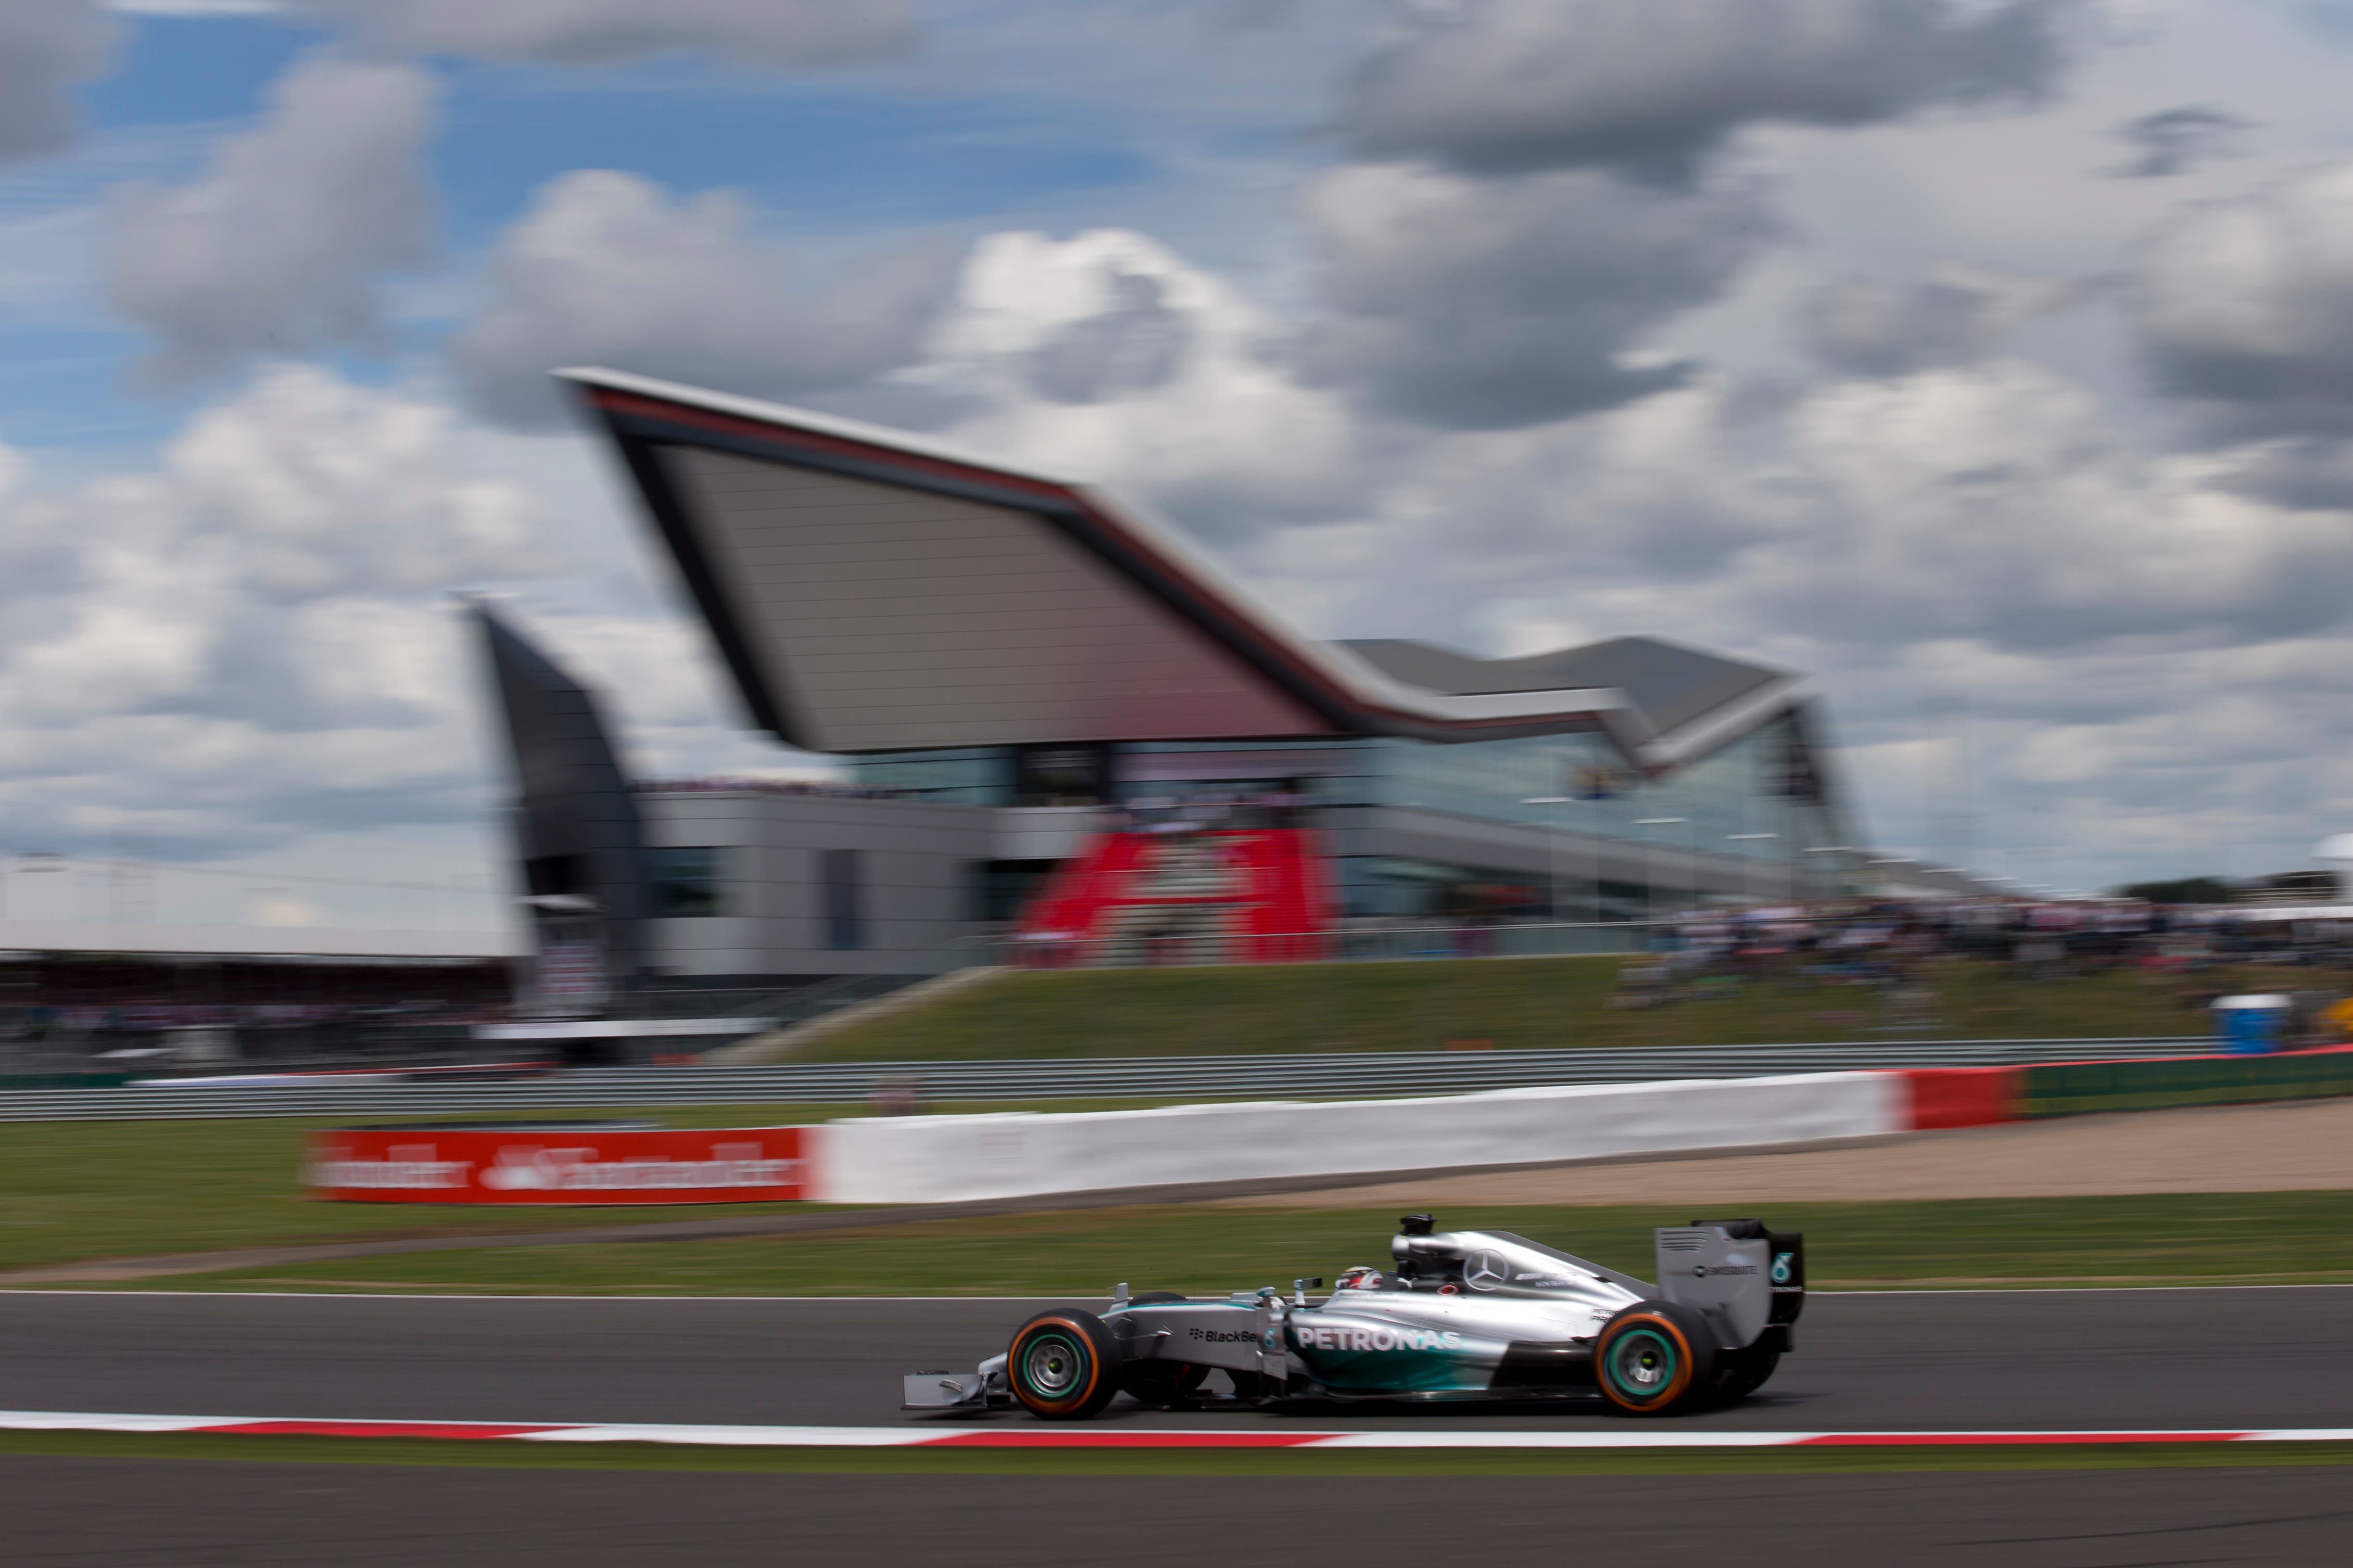 Britain's Lewis Hamilton of Mercedes drives his car to first place during the British Formula One Grand Prix at Silverstone circuit, Silverstone, England, Sunday, July 6, 2014. Finland's Valtteri Bottas of Williams finished second and Australia's Daniel Ricciardo of Red Bull finished third. (AP Photo/Jon Super)